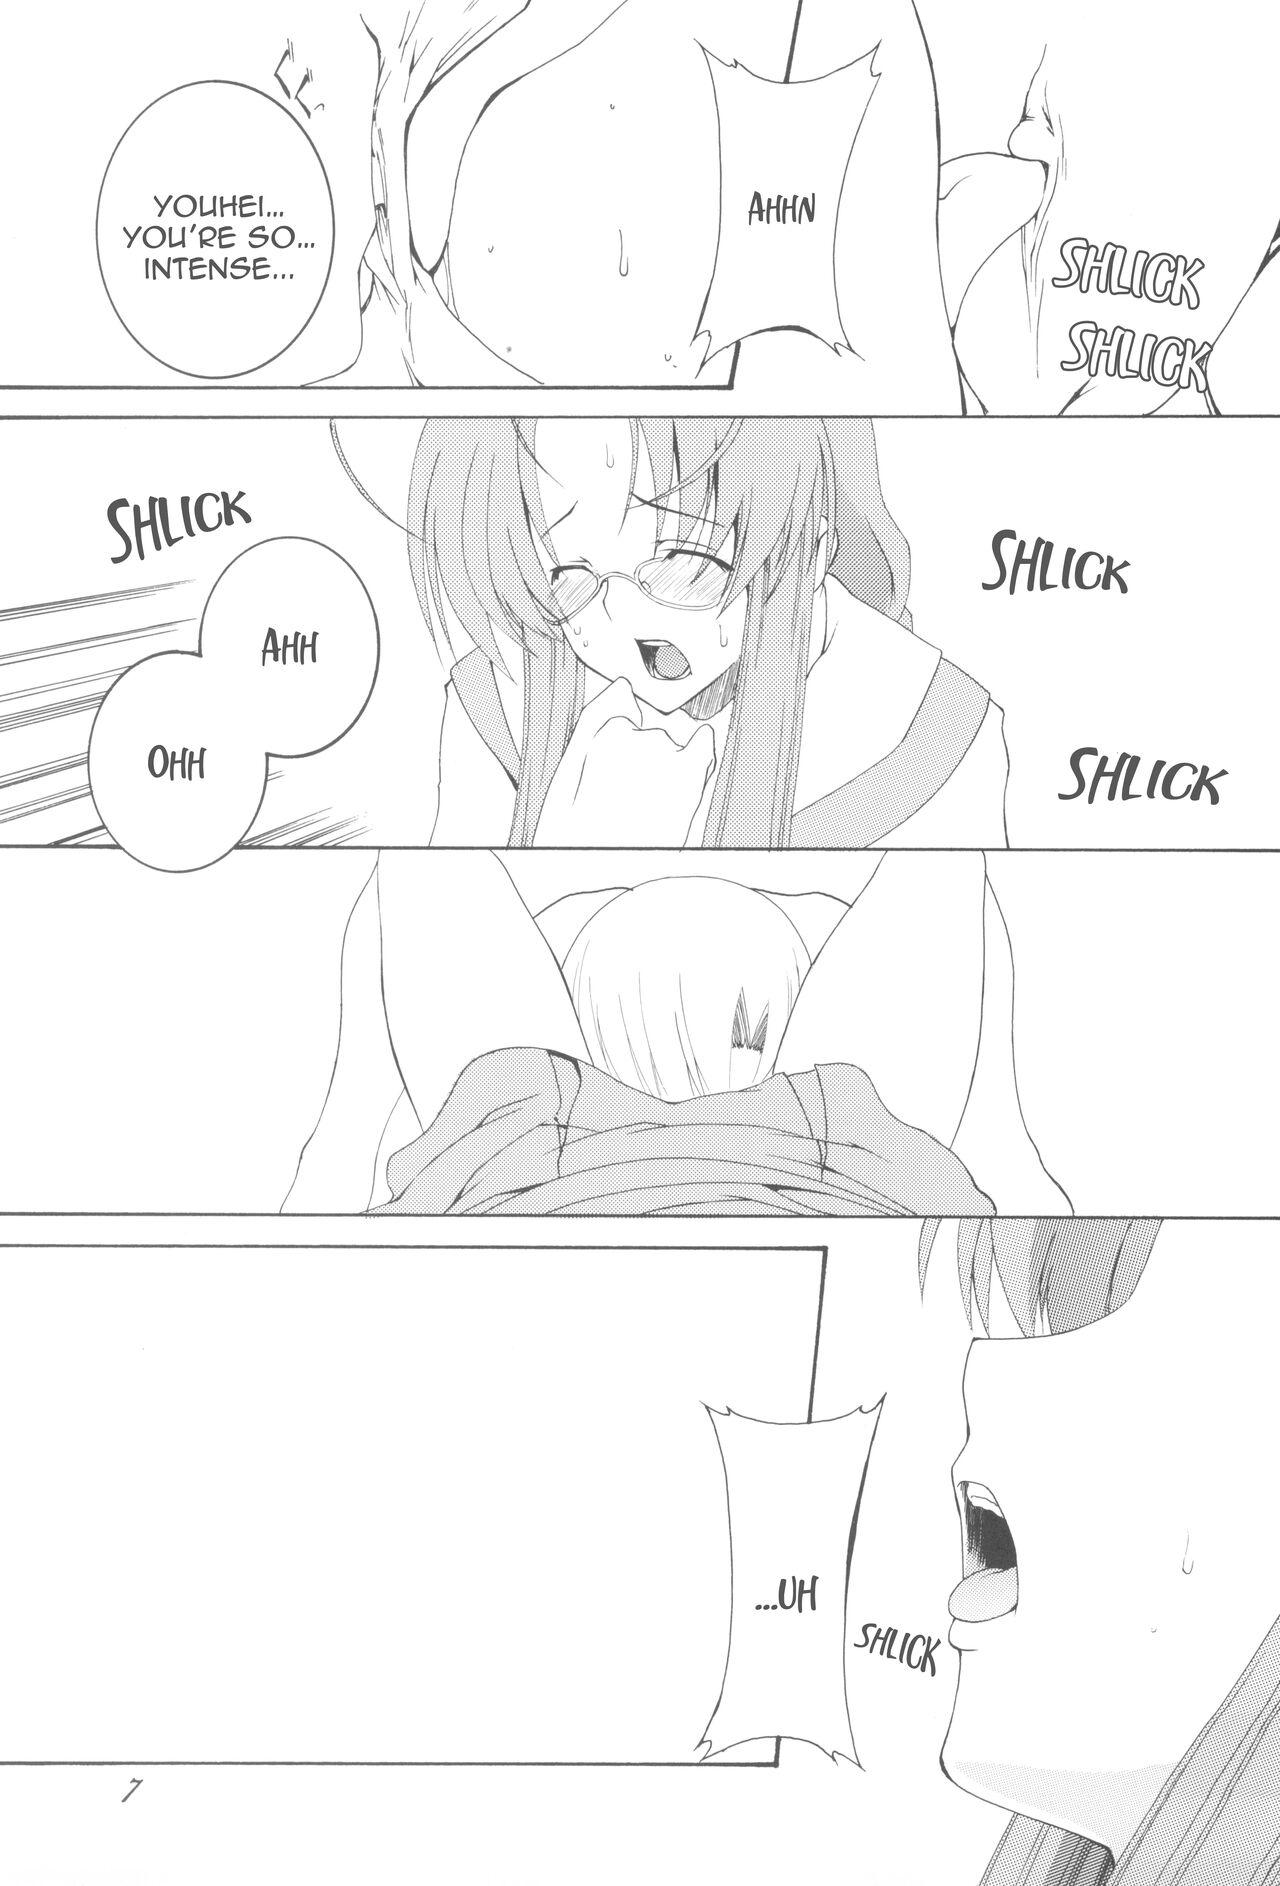 Stepsiblings Being Beauteous - Clannad Pica - Page 6